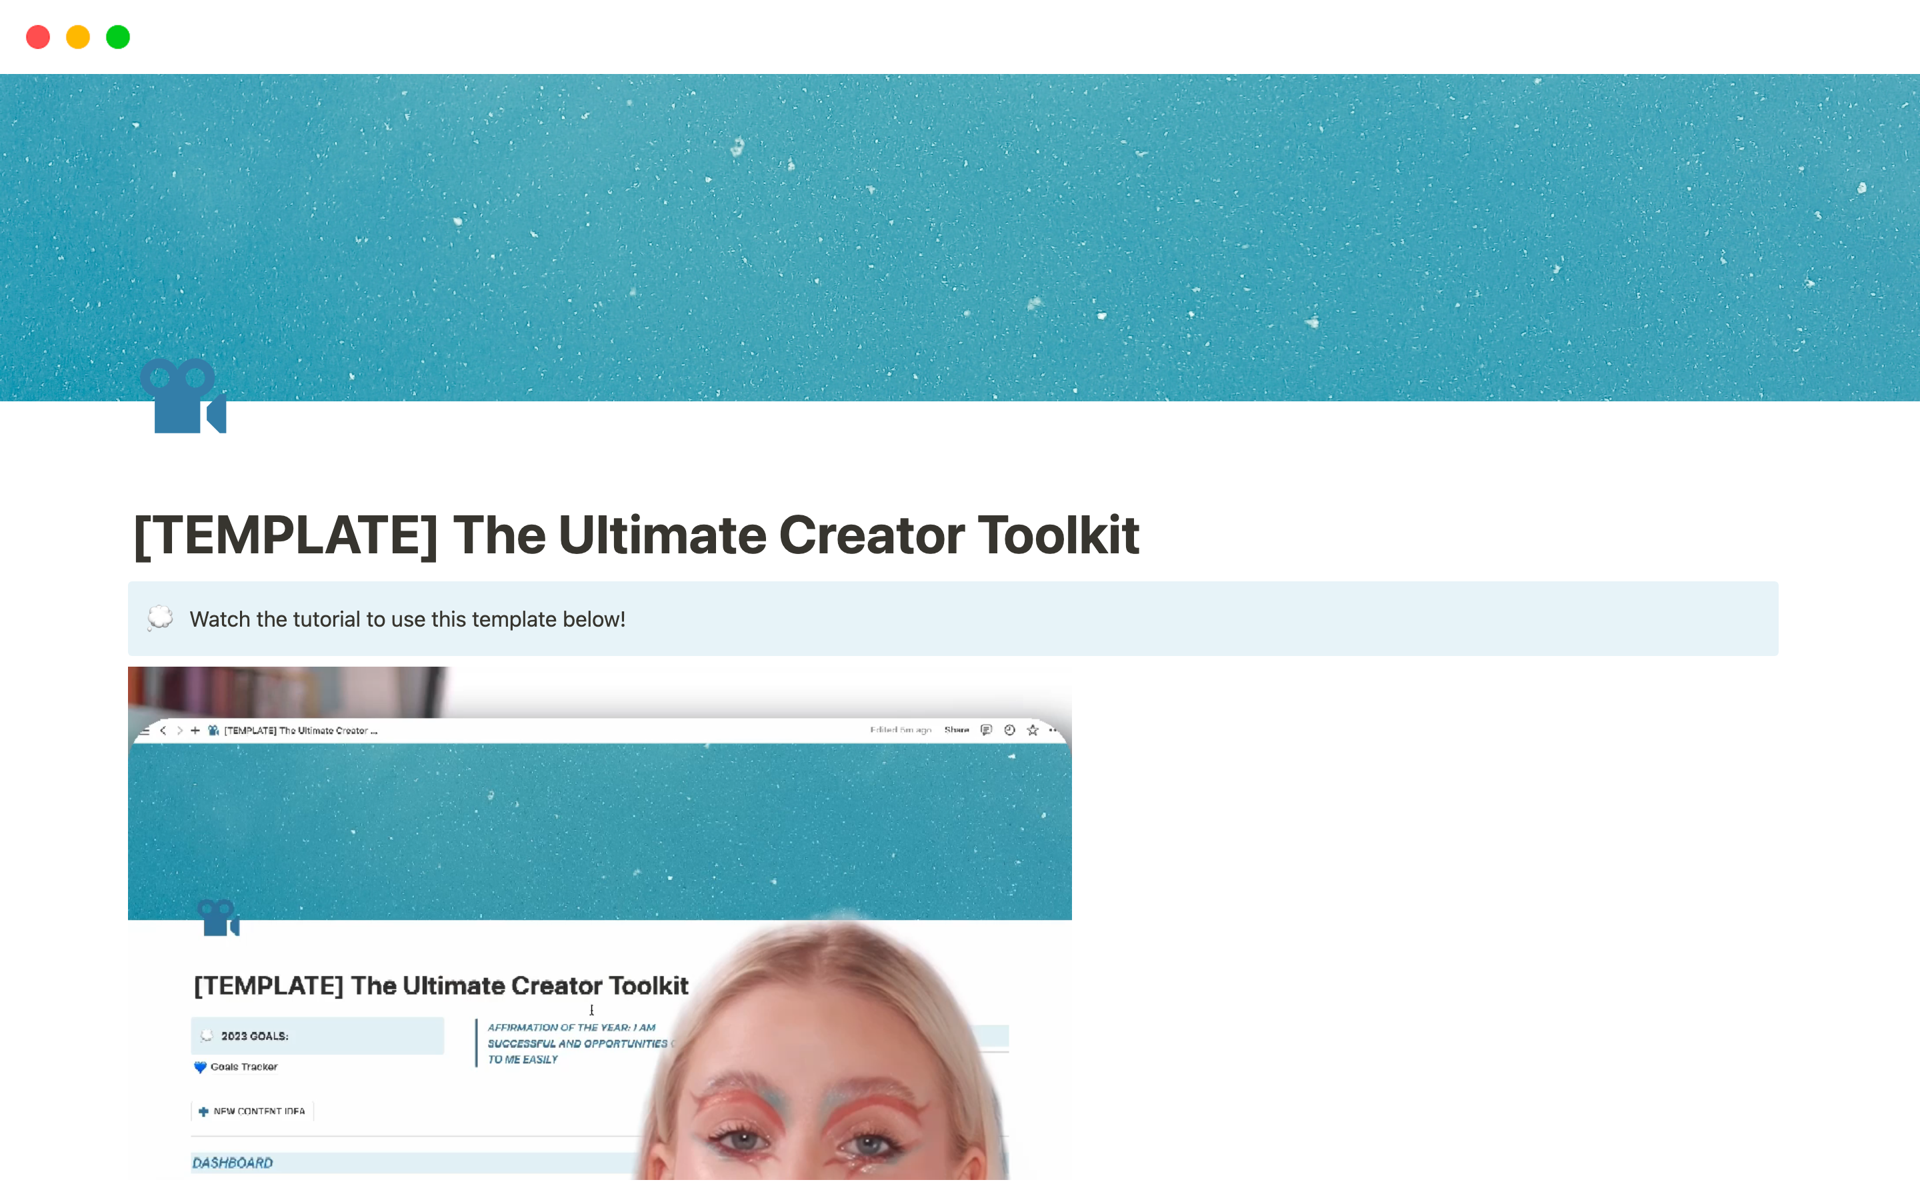 The Ultimate Creator Toolkit is an all-in-one template you need to create, manage and track your content and brand deals.